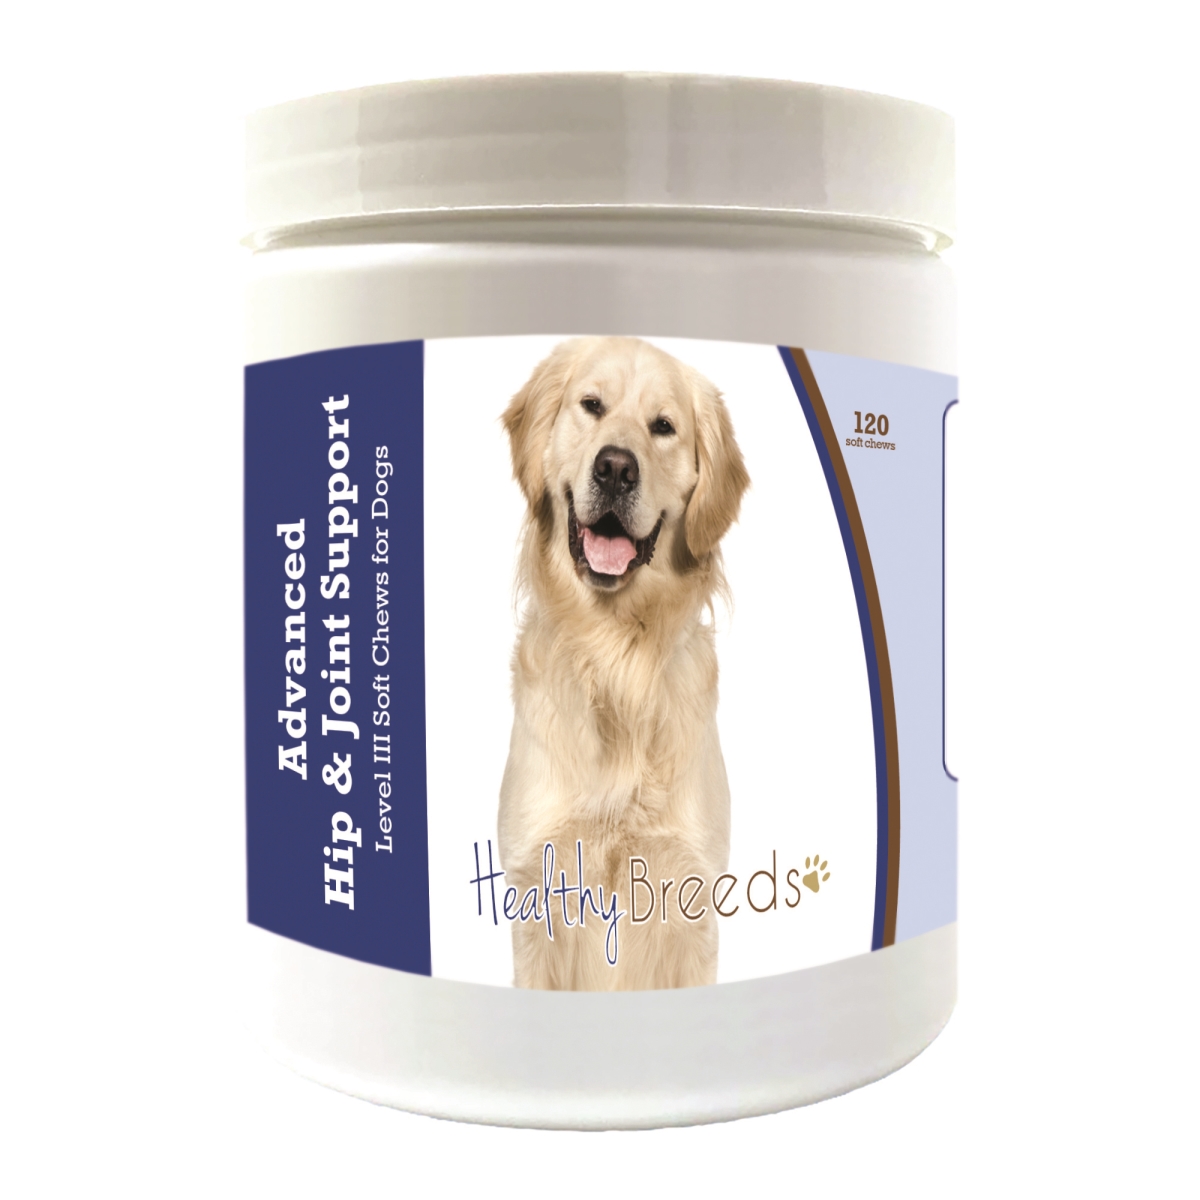 Picture of Healthy Breeds 192959898330 Golden Retriever Advanced Hip & Joint Support Level III Soft Chews for Dogs